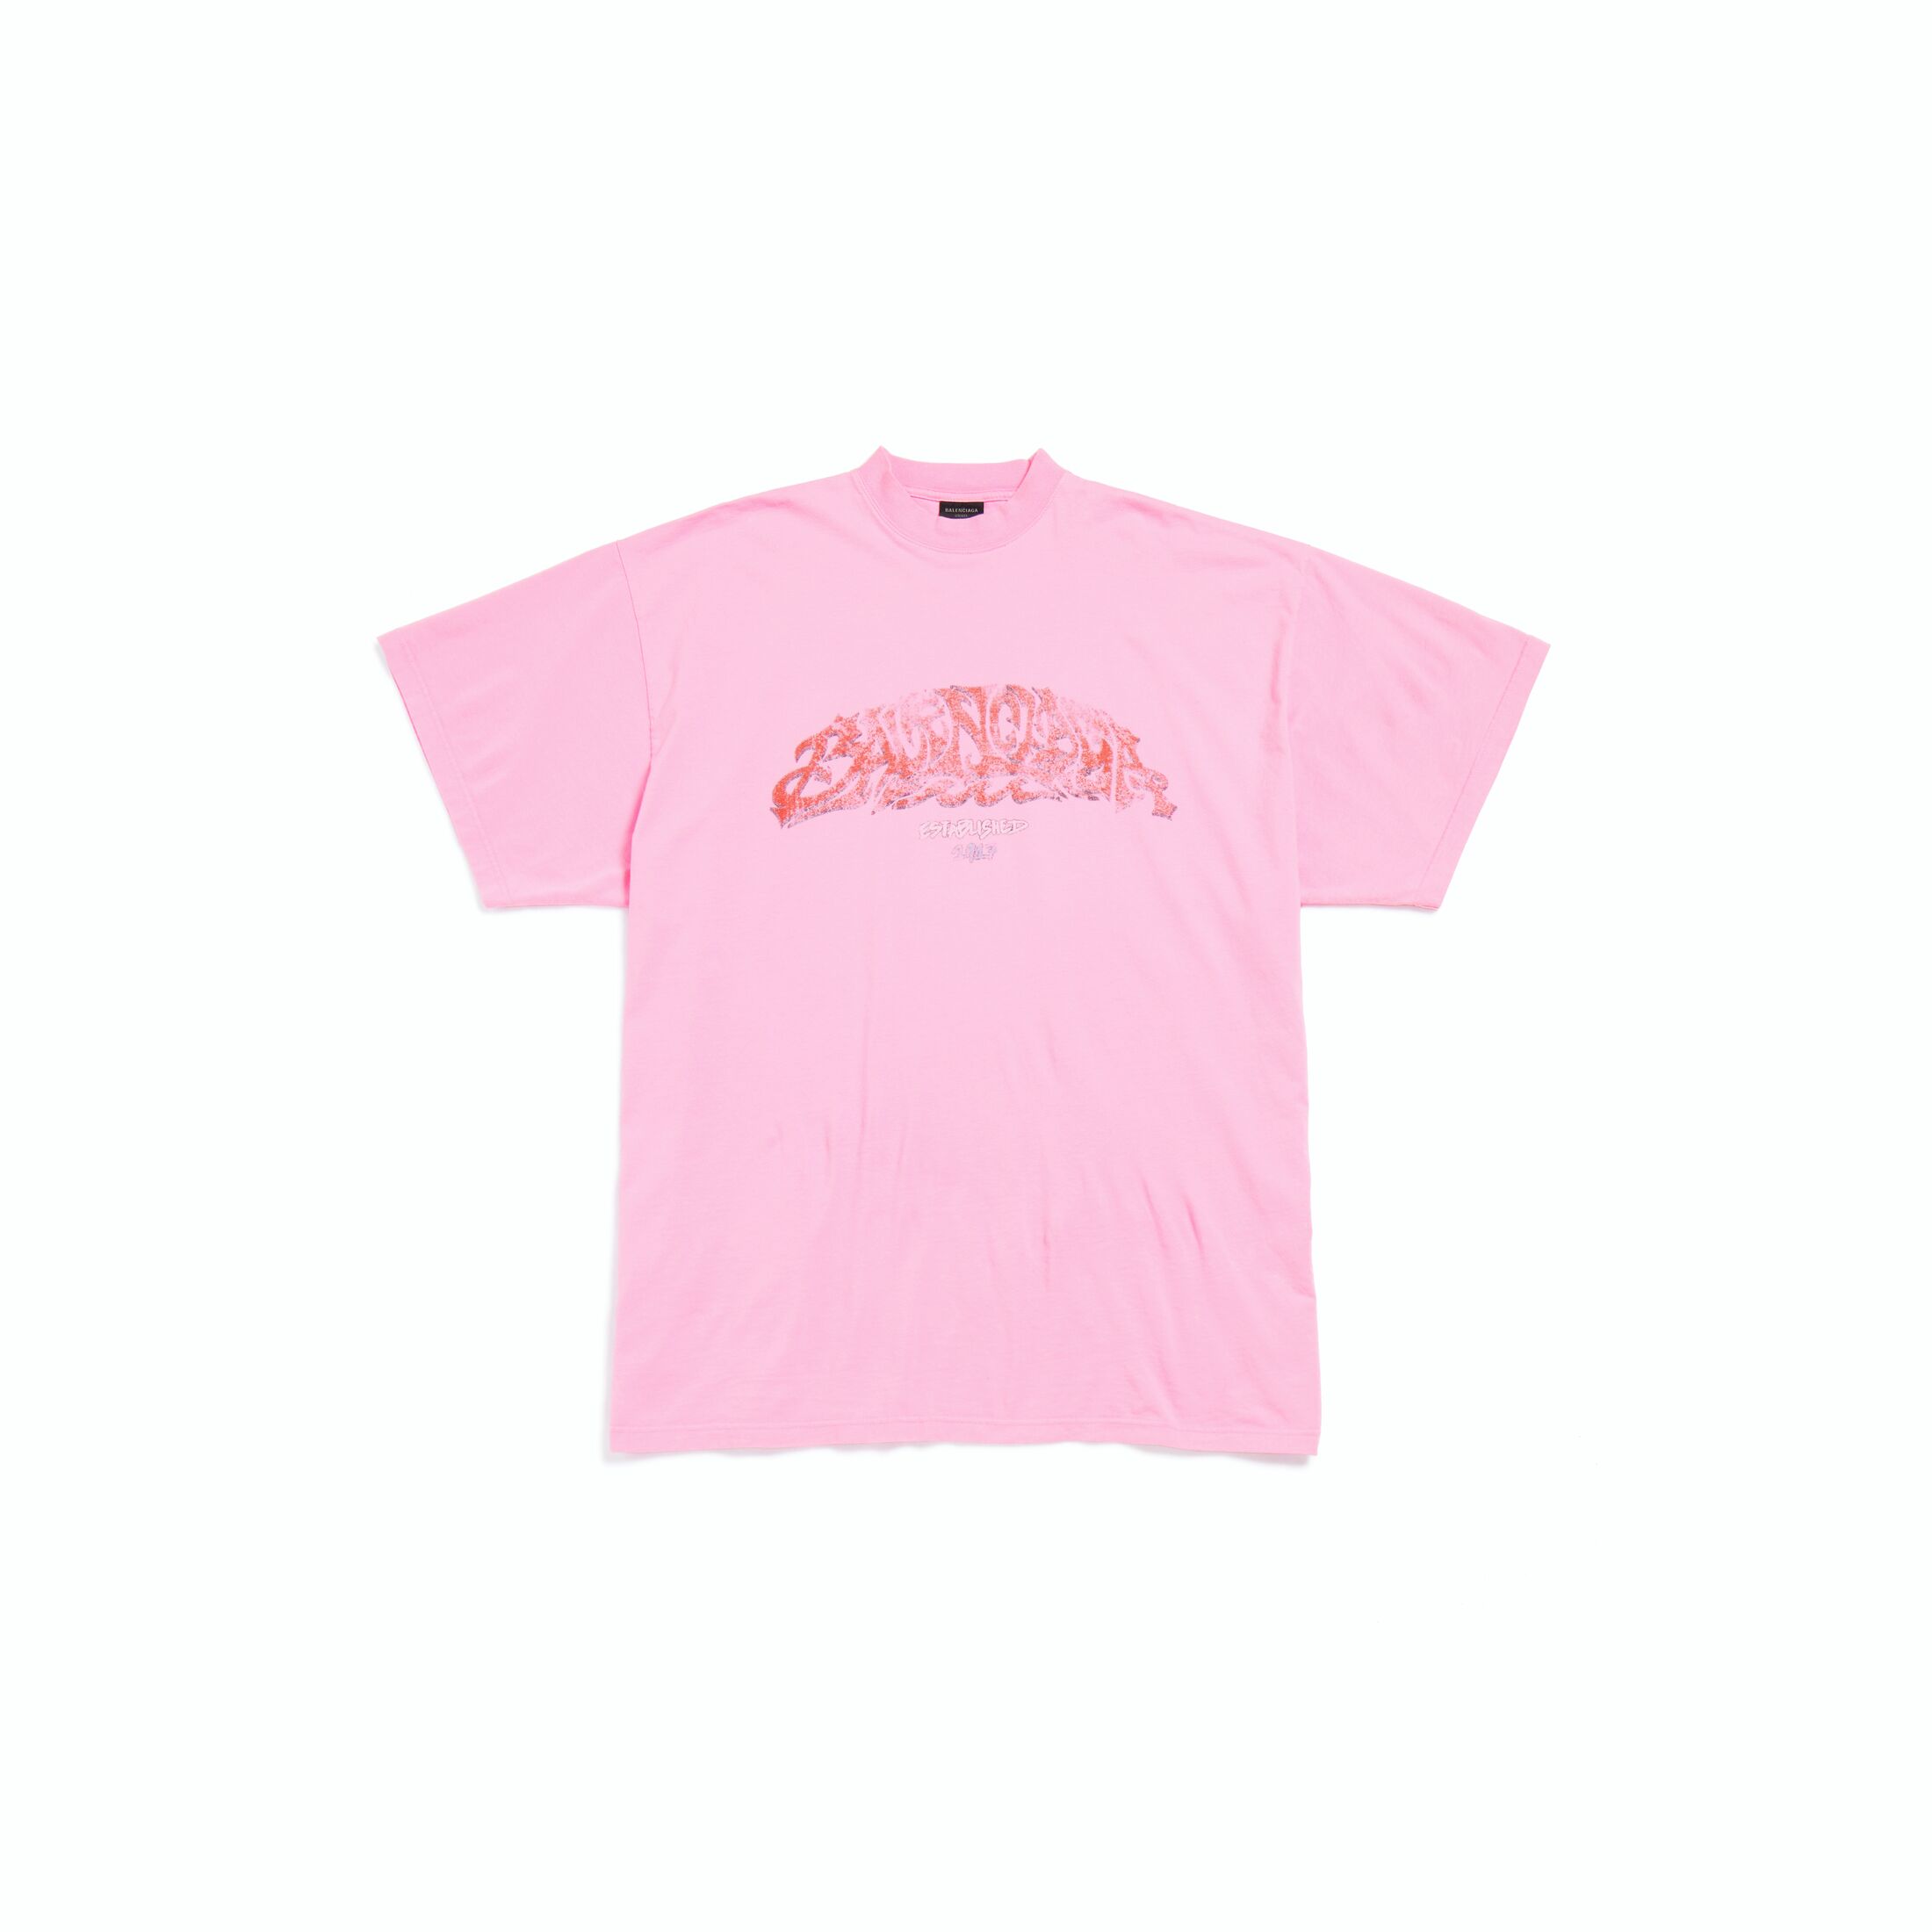 Offshore T-shirt Oversized in Pink | Balenciaga US